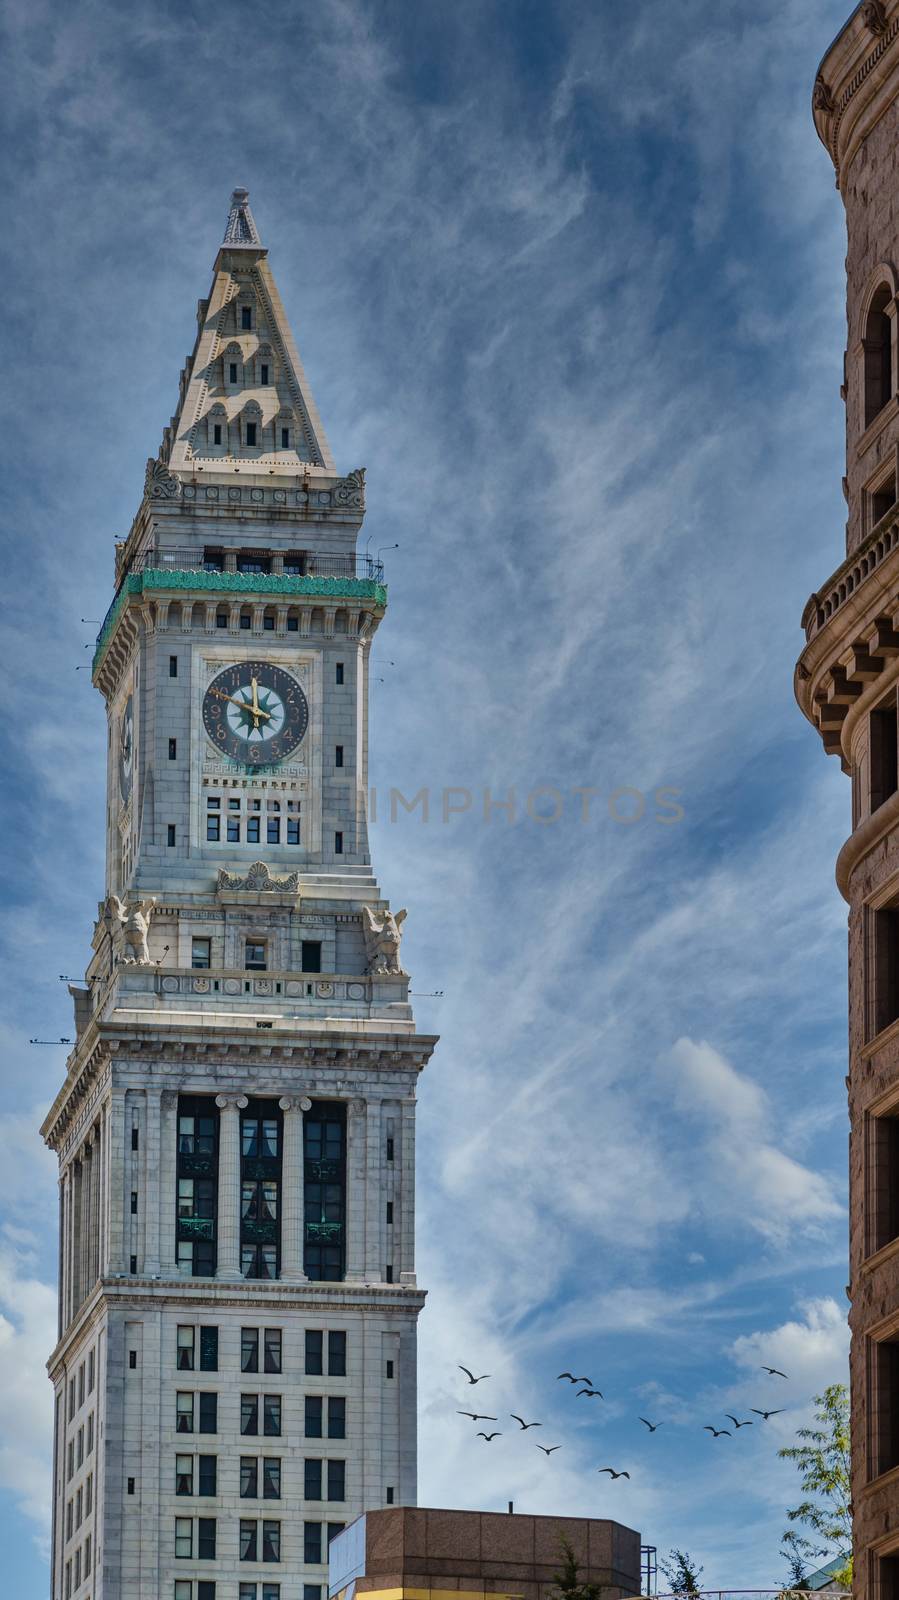 Old Clock Tower in Boston on Nice Sky by dbvirago